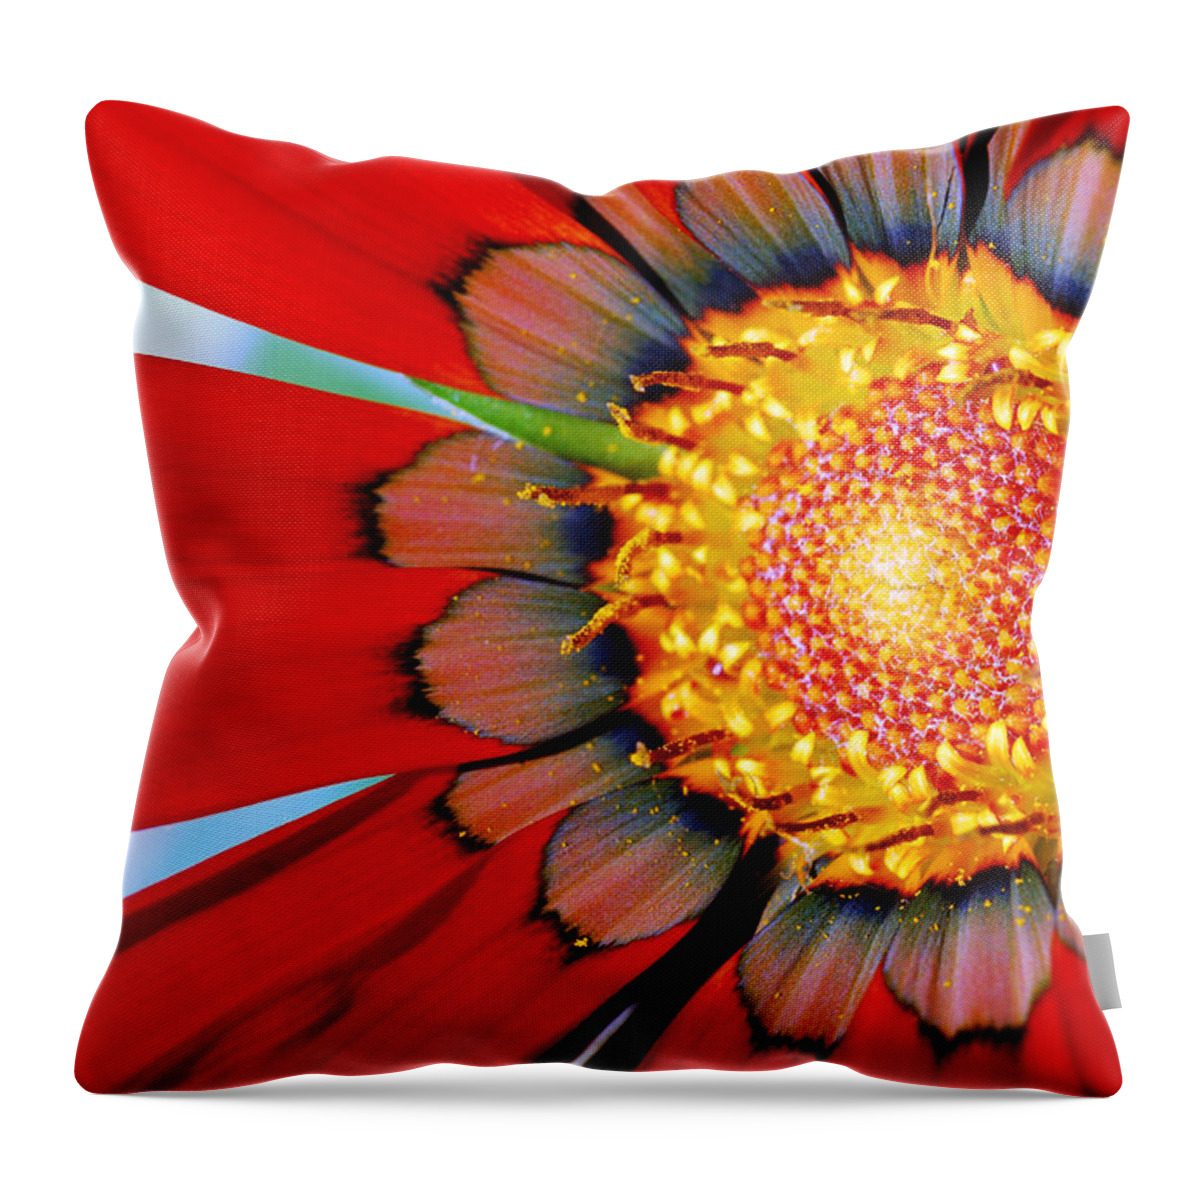 Zinnia Throw Pillow featuring the photograph Zinnia In Red by Wendy Wilton